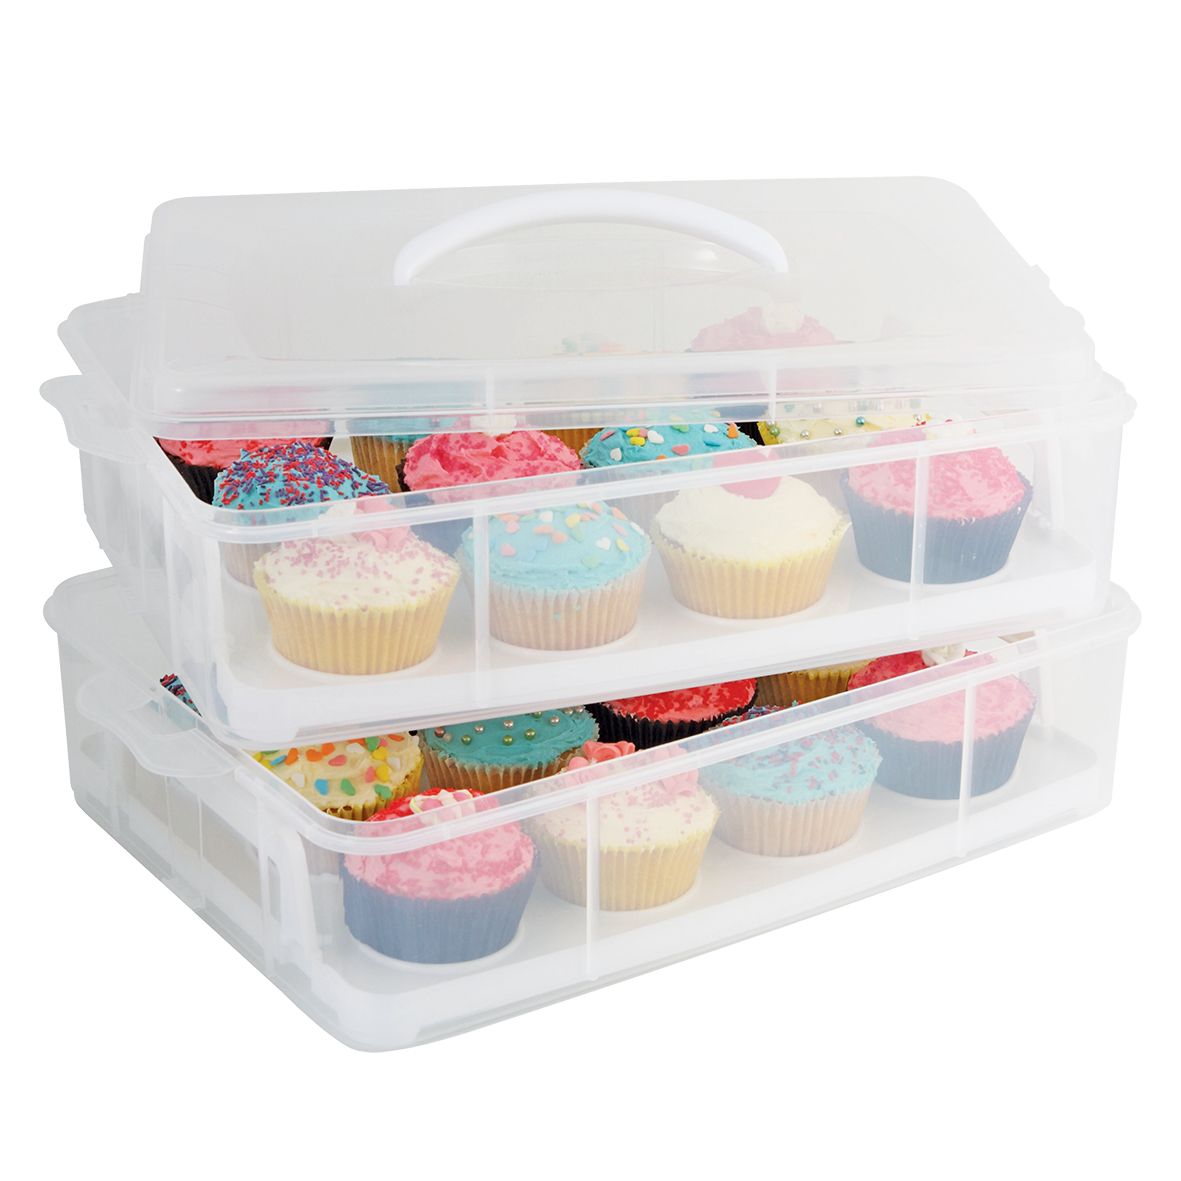 CUPCAKE CARRIER FOR 24